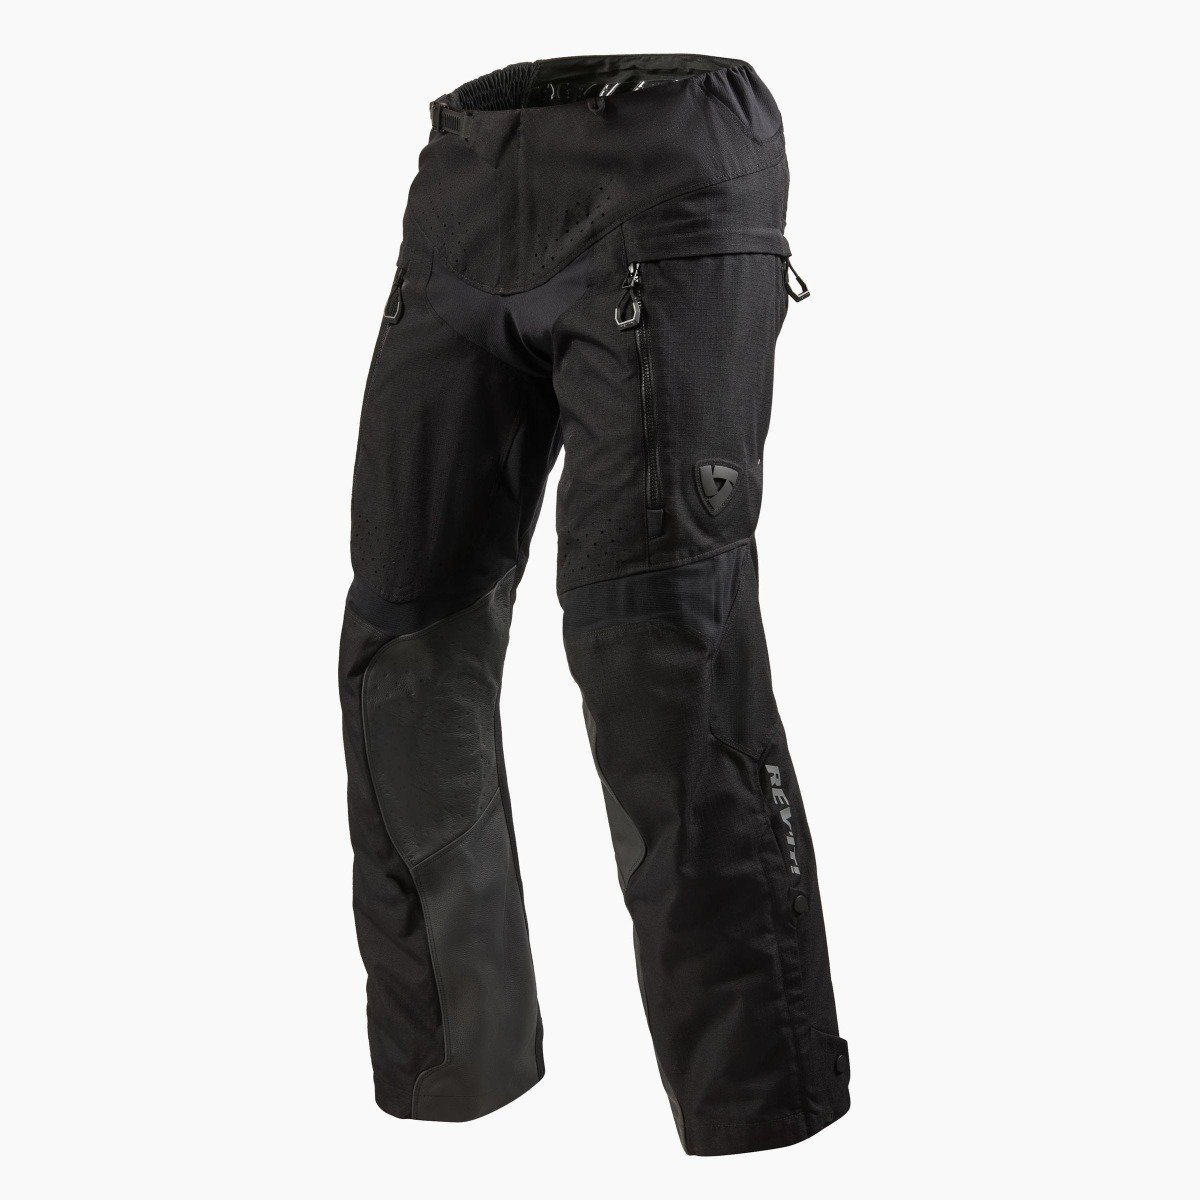 Image of REV'IT! Continent Black Motorcycle Pants Size S ID 8700001297028